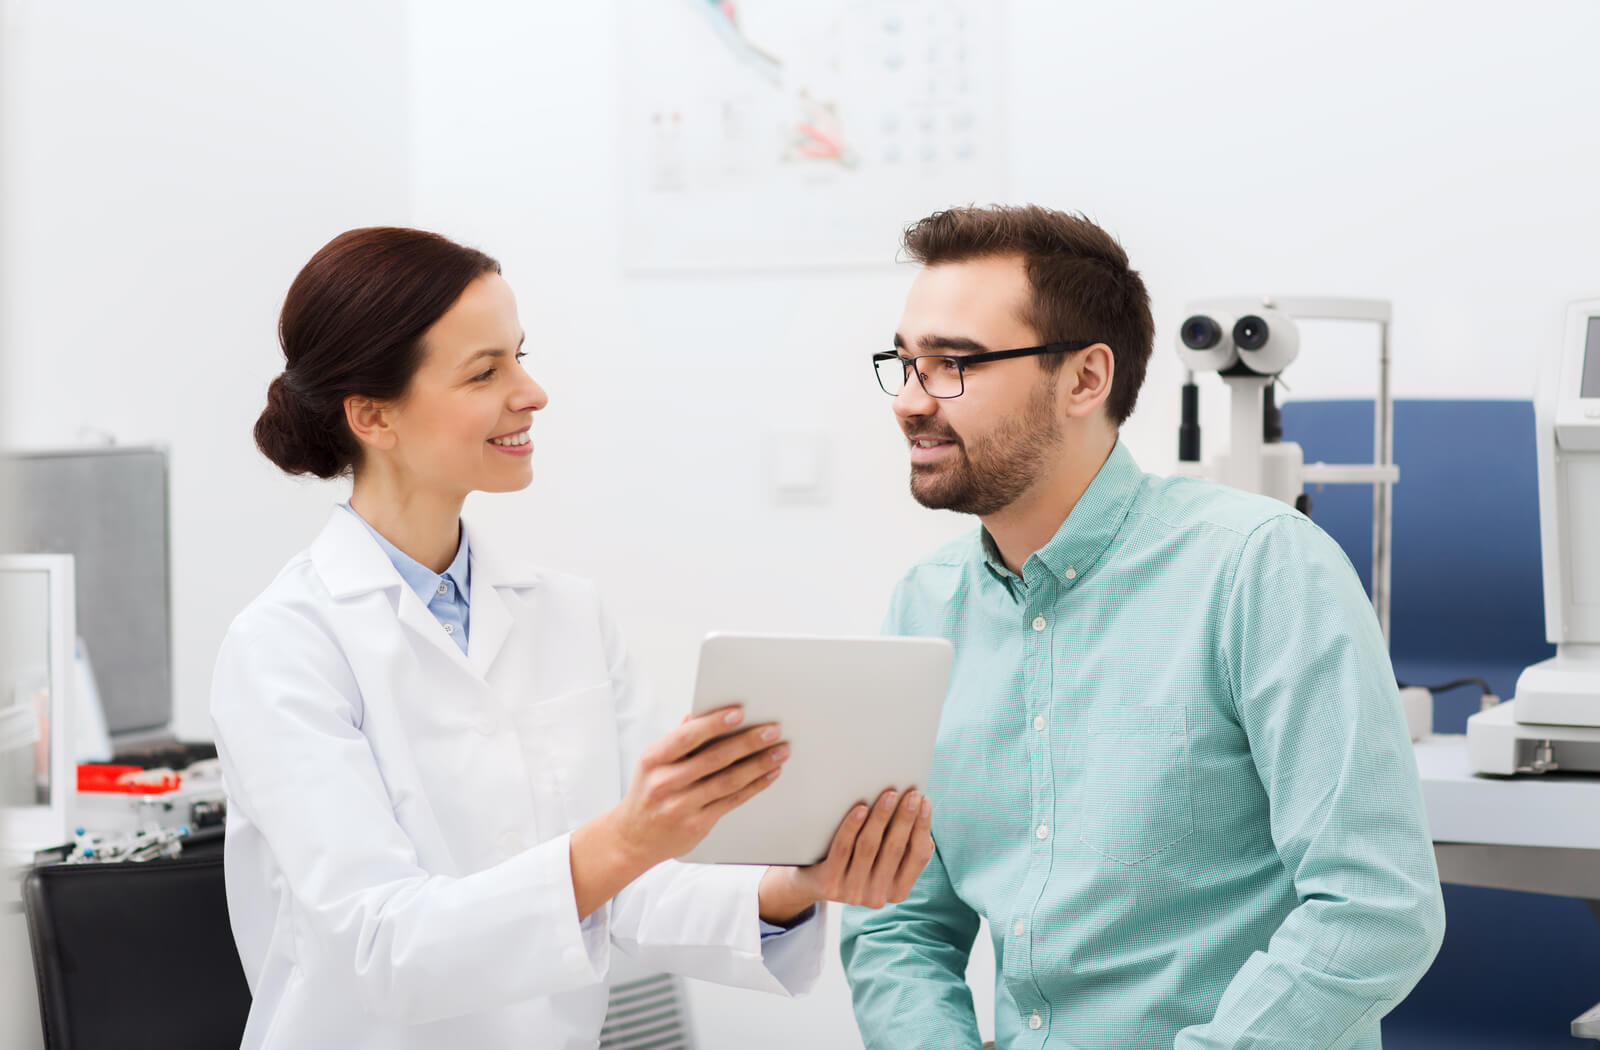 A female optometrist talking to a patient and giving him some paperwork